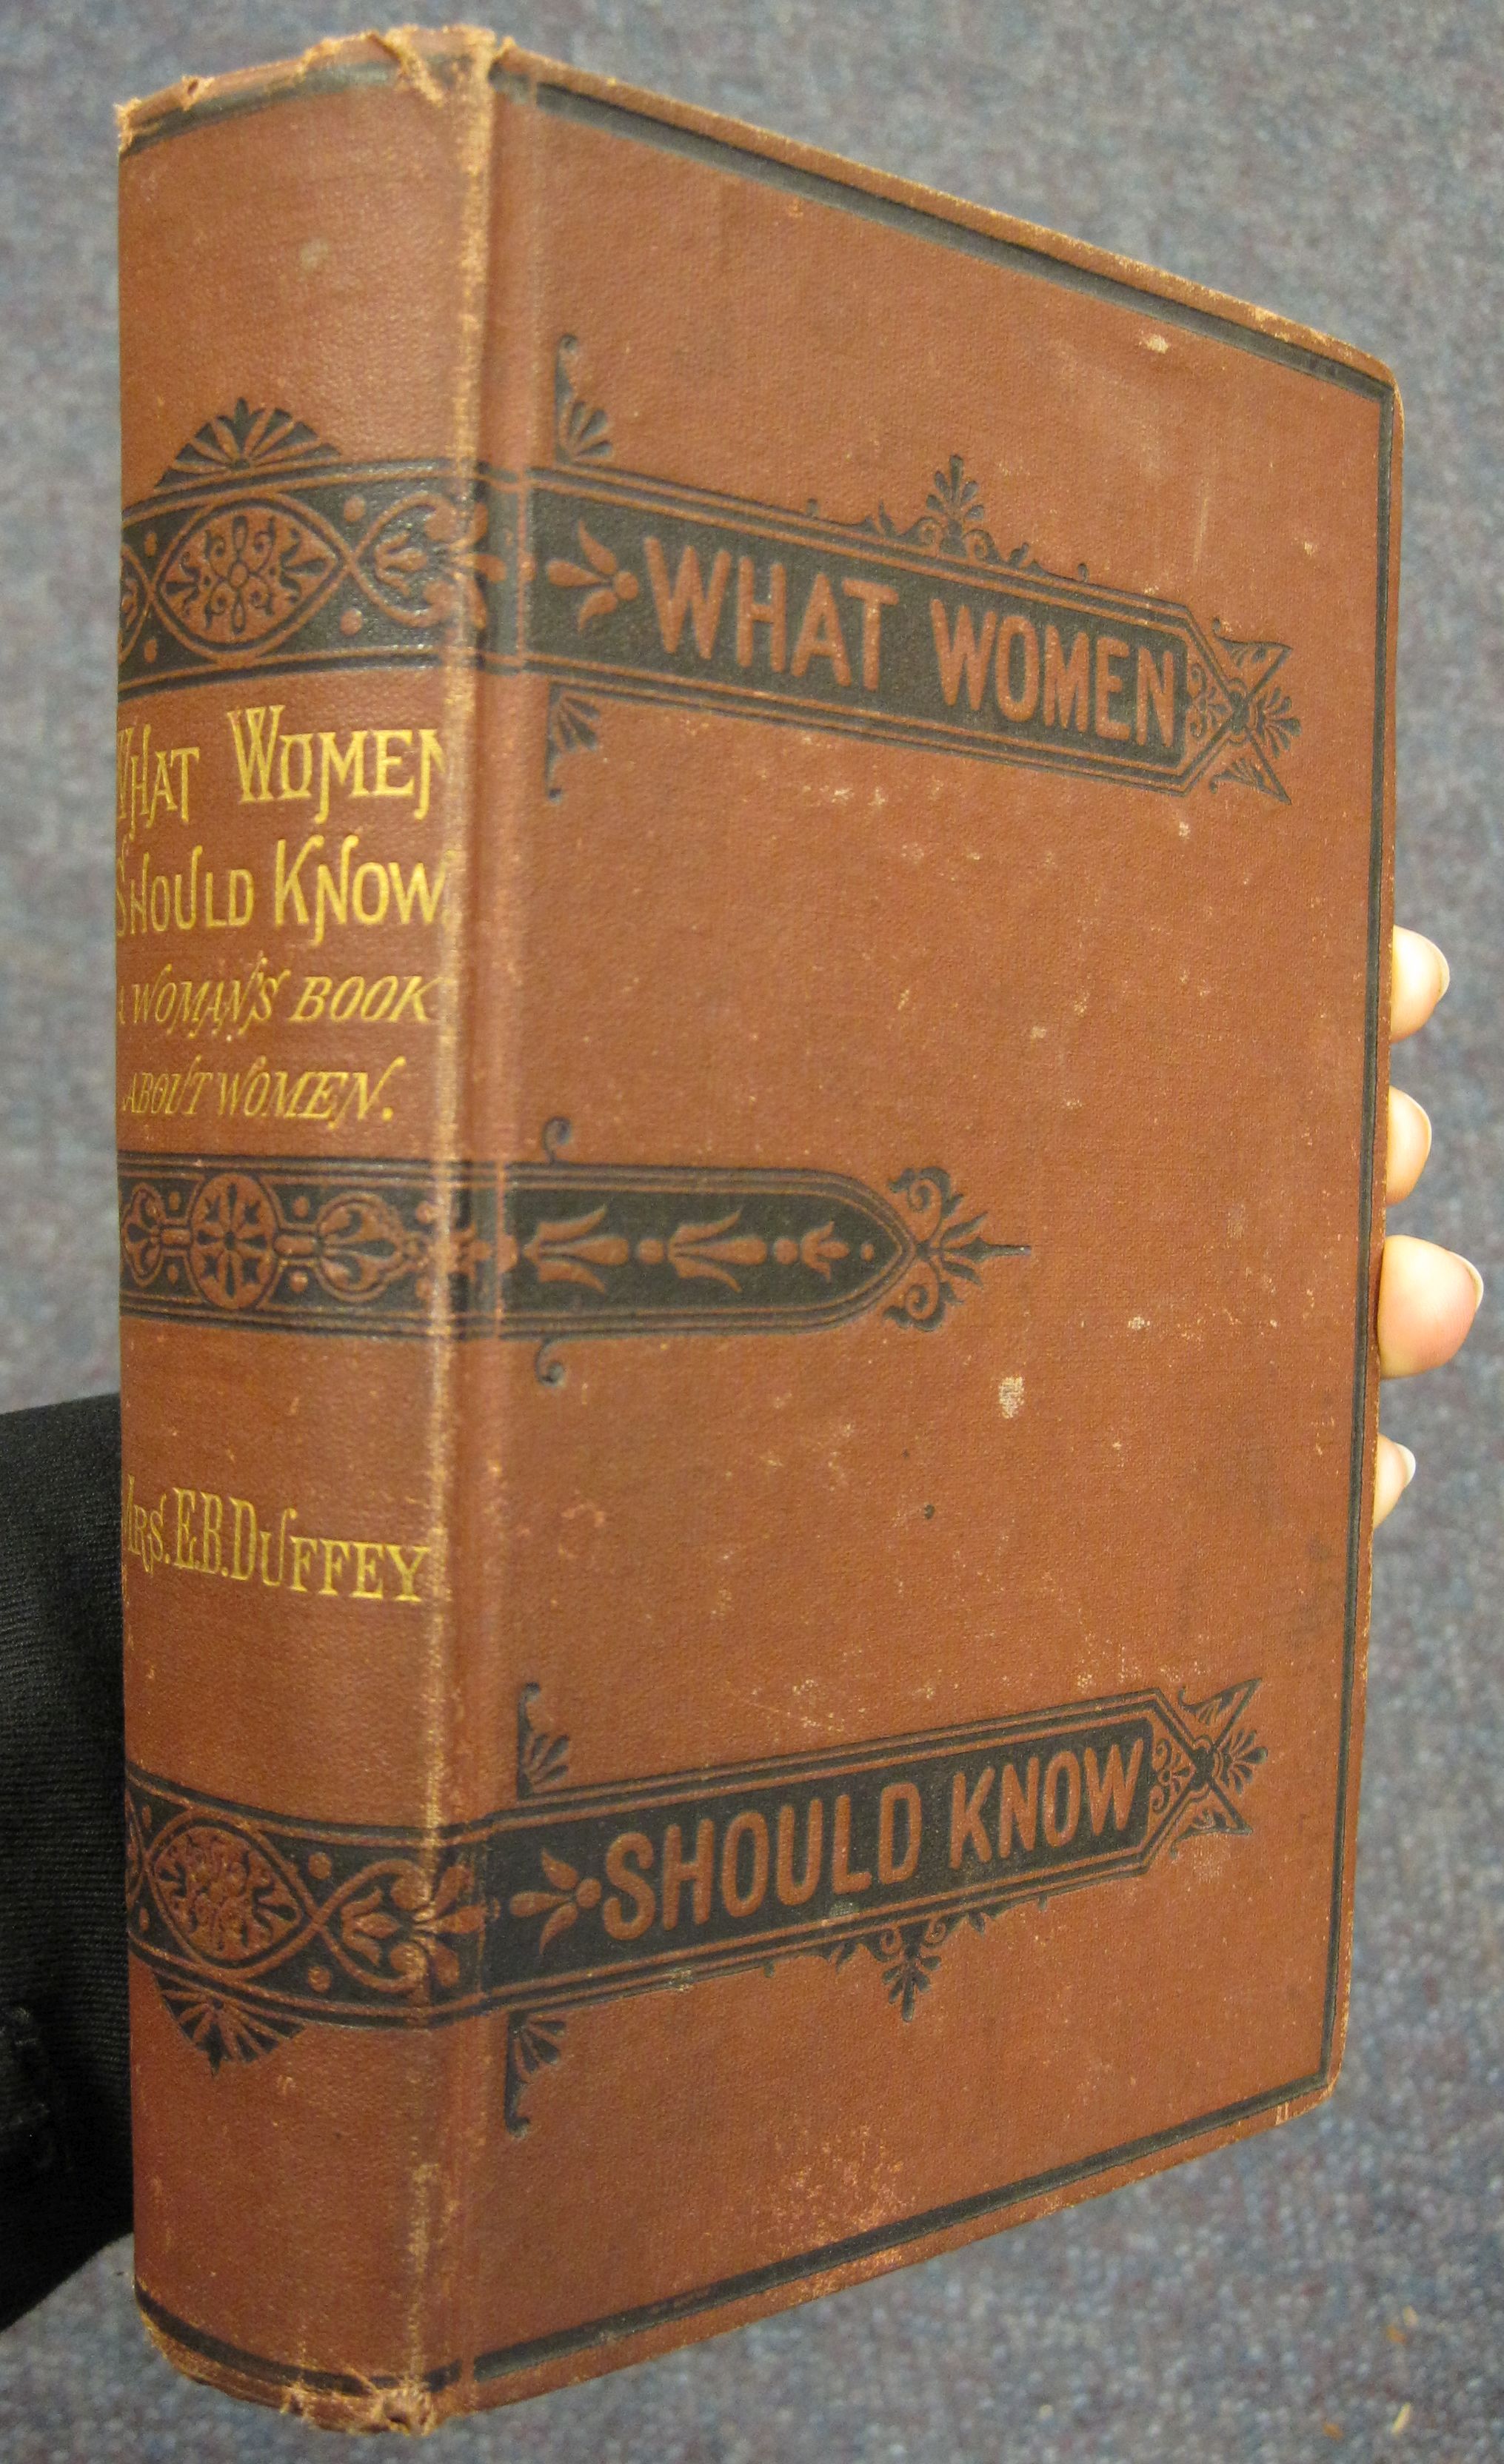 An 1873 Manual for Modern Mothers